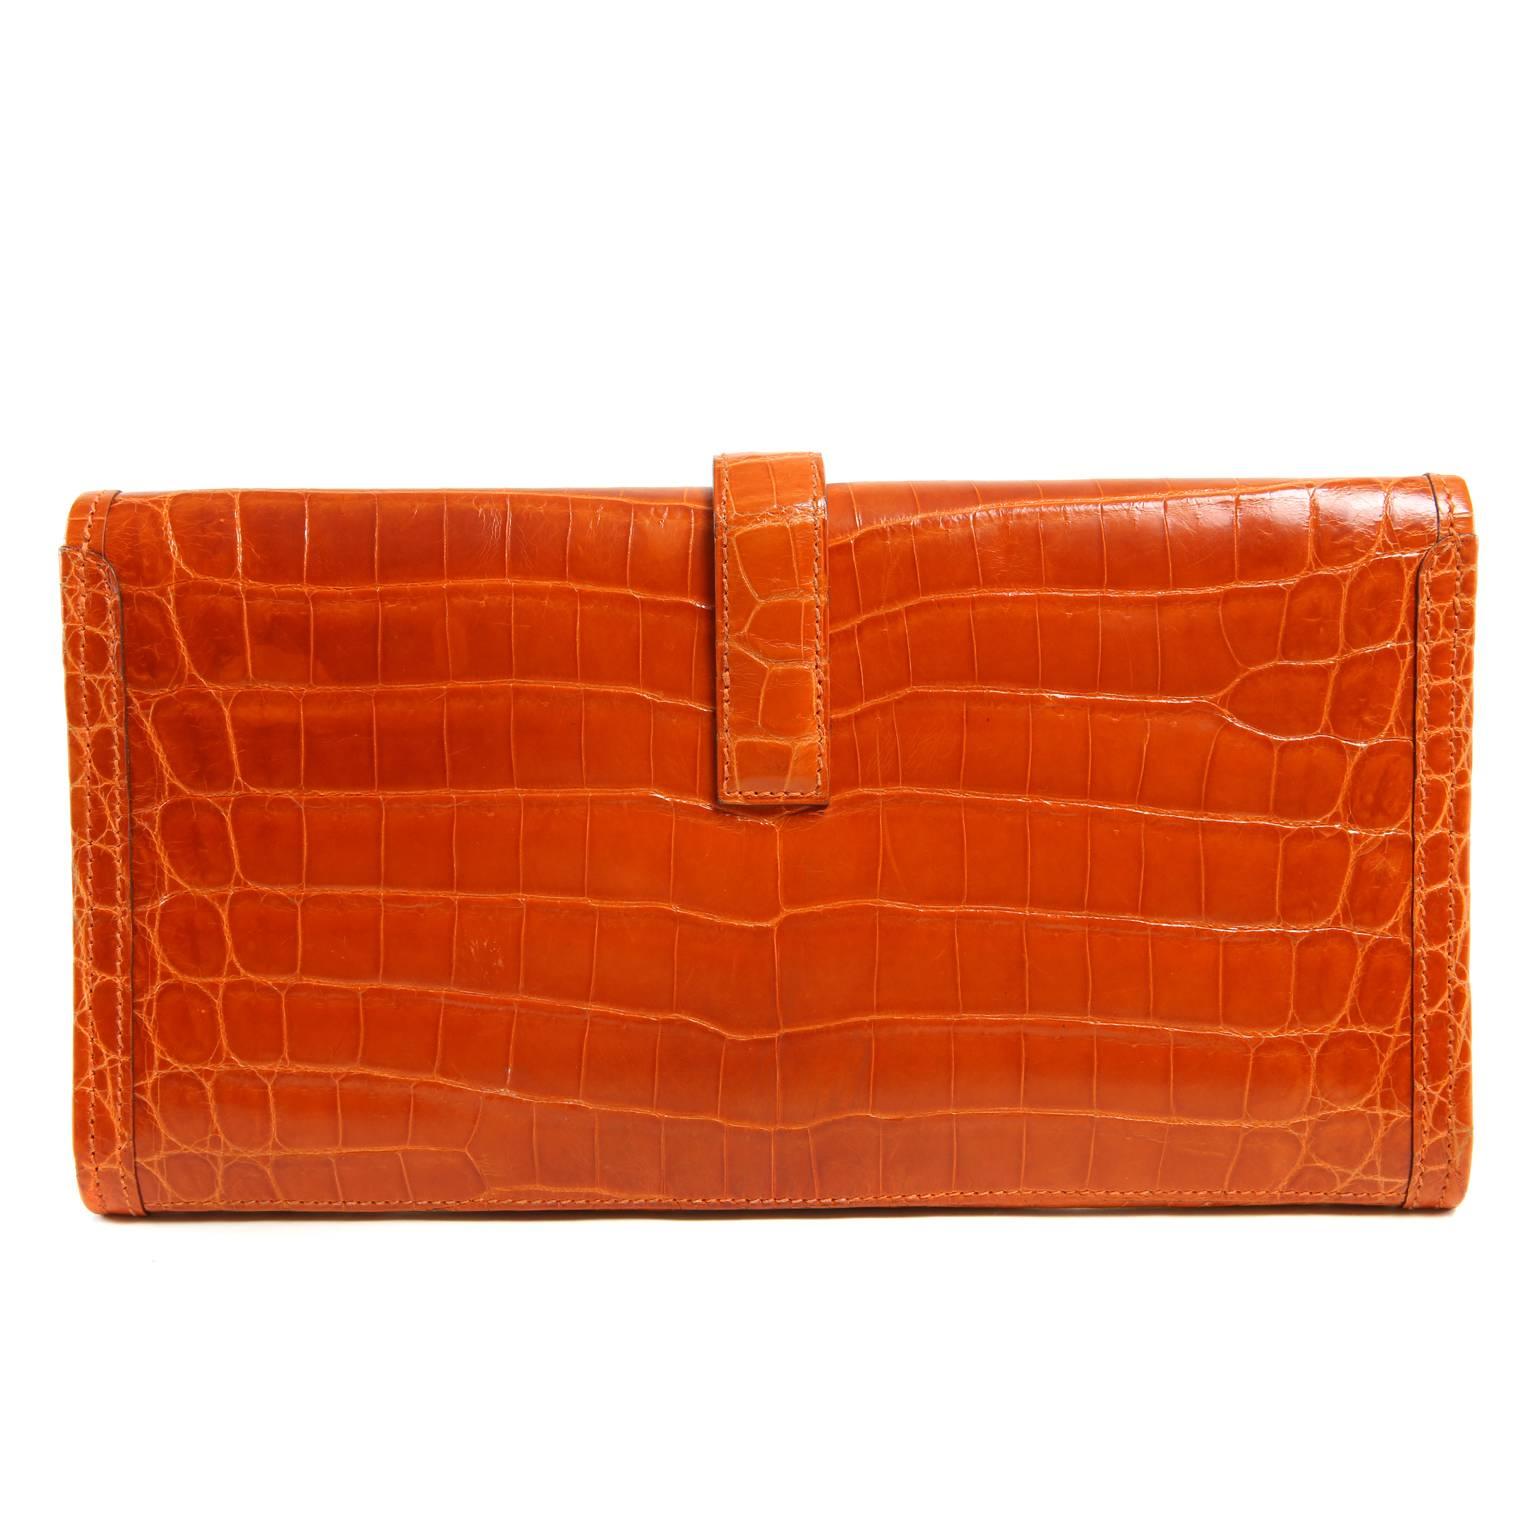 Hermès Orange Niloticus Crocodile Jige Clutch- PRISTINE
  Extremely collectible, exotic Hermès pieces are very rare.  The highest quality skins are used to make each piece by hand.  Exotics are naturally more expensive than bovine pieces.
